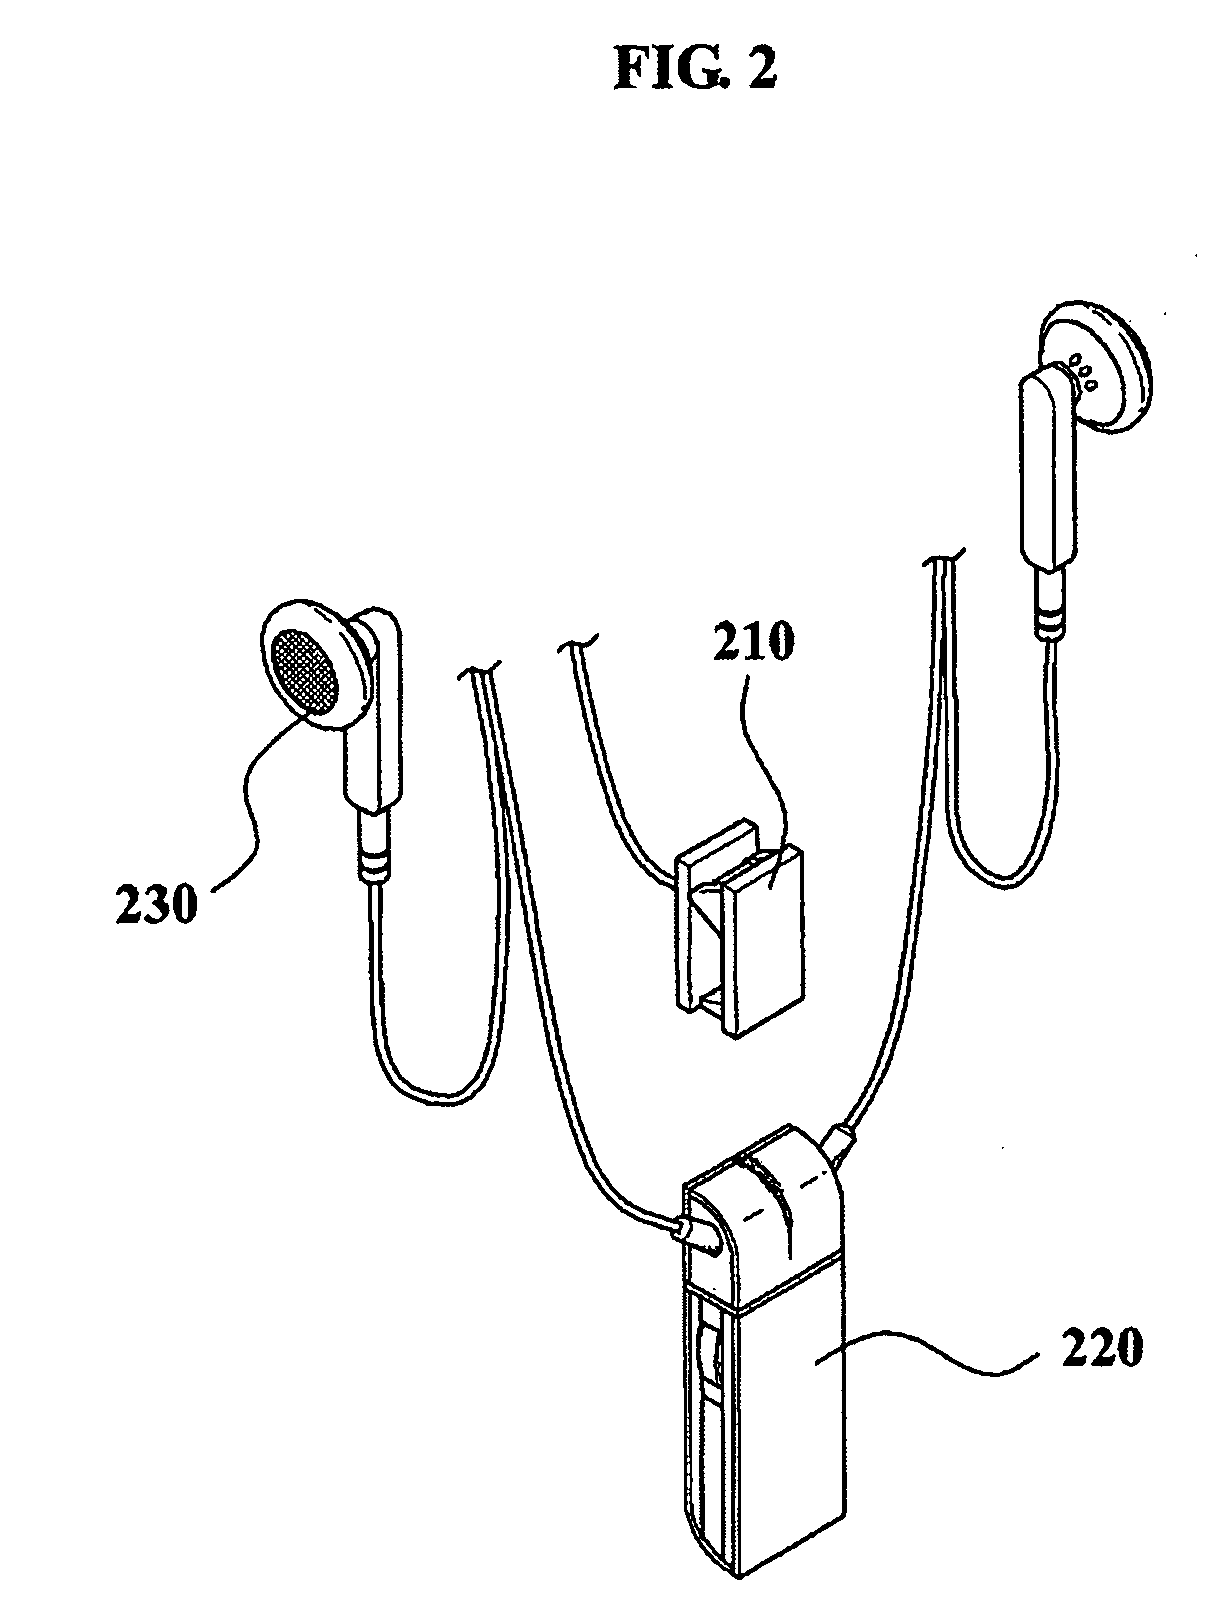 Biosignal measurement apparatus and the method thereof